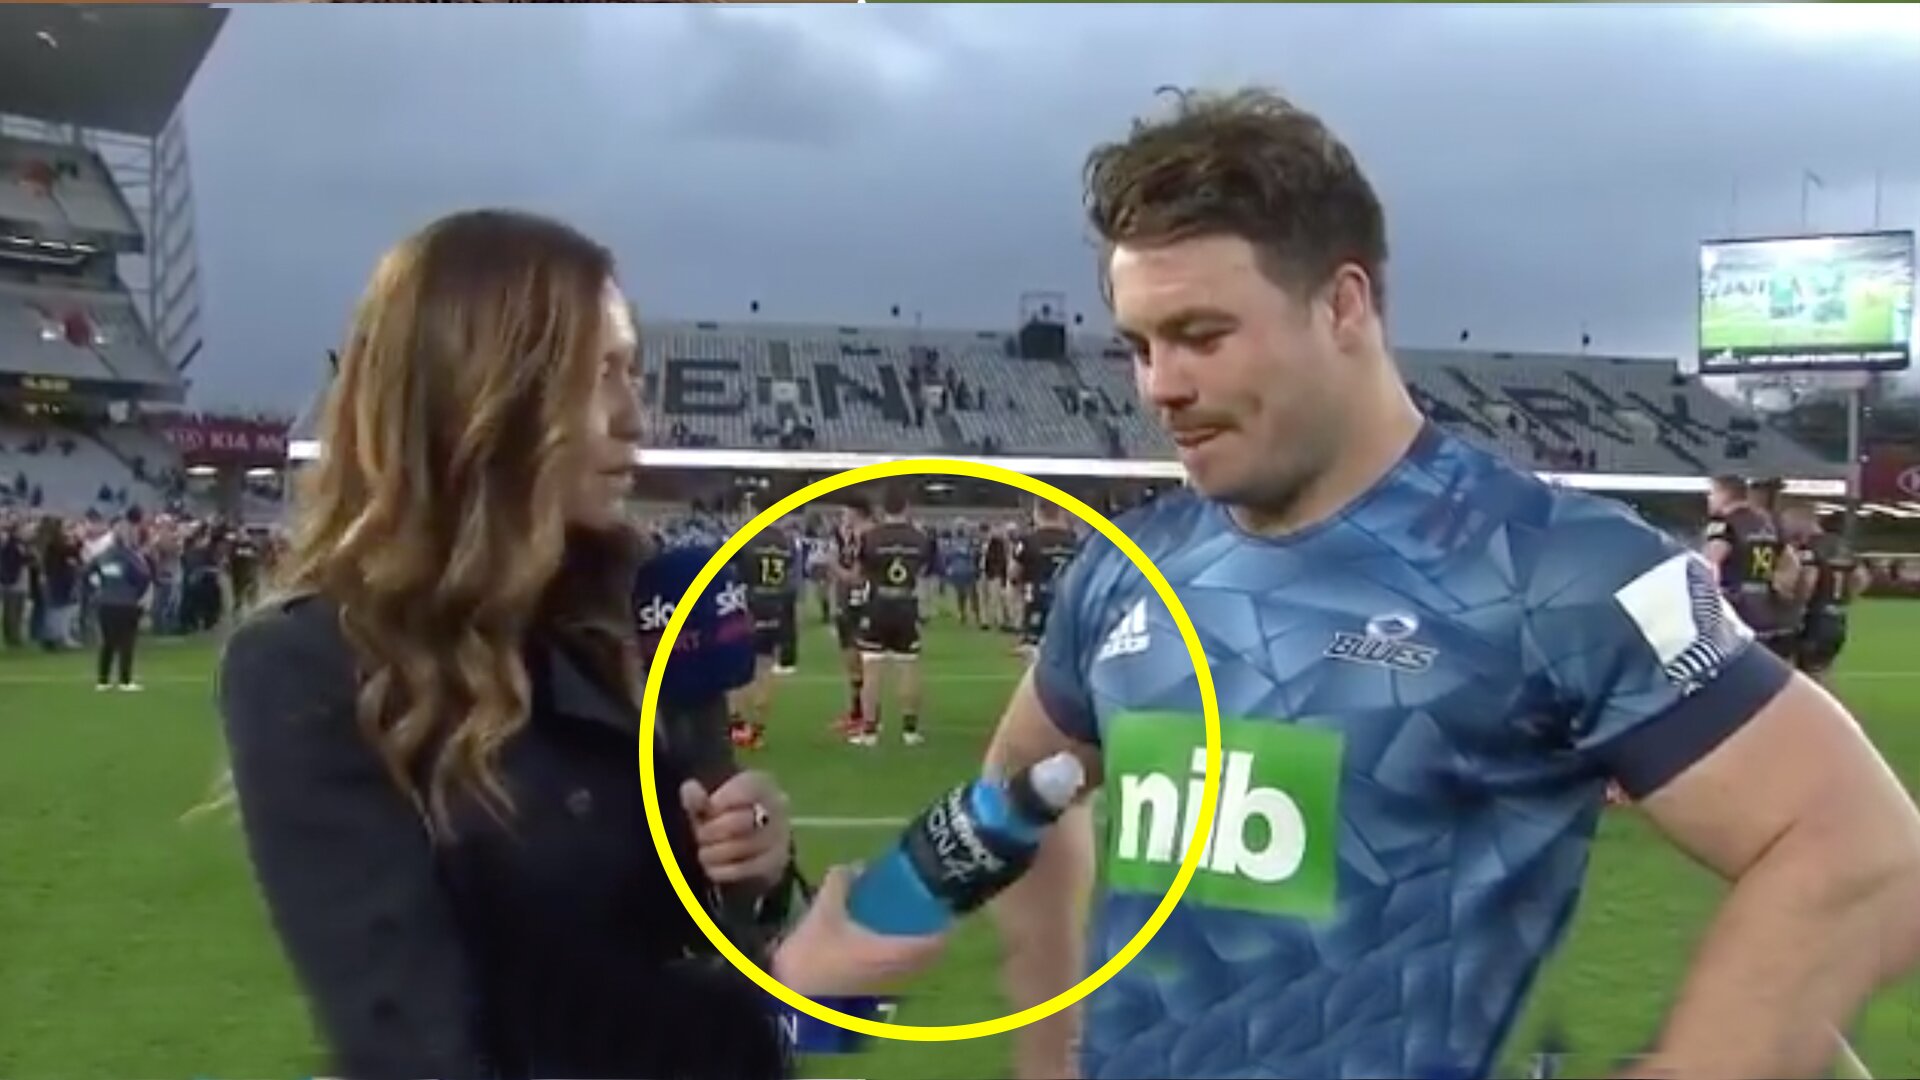 Blues player is handed a Blue powerade during post match interview - Epicness ensues